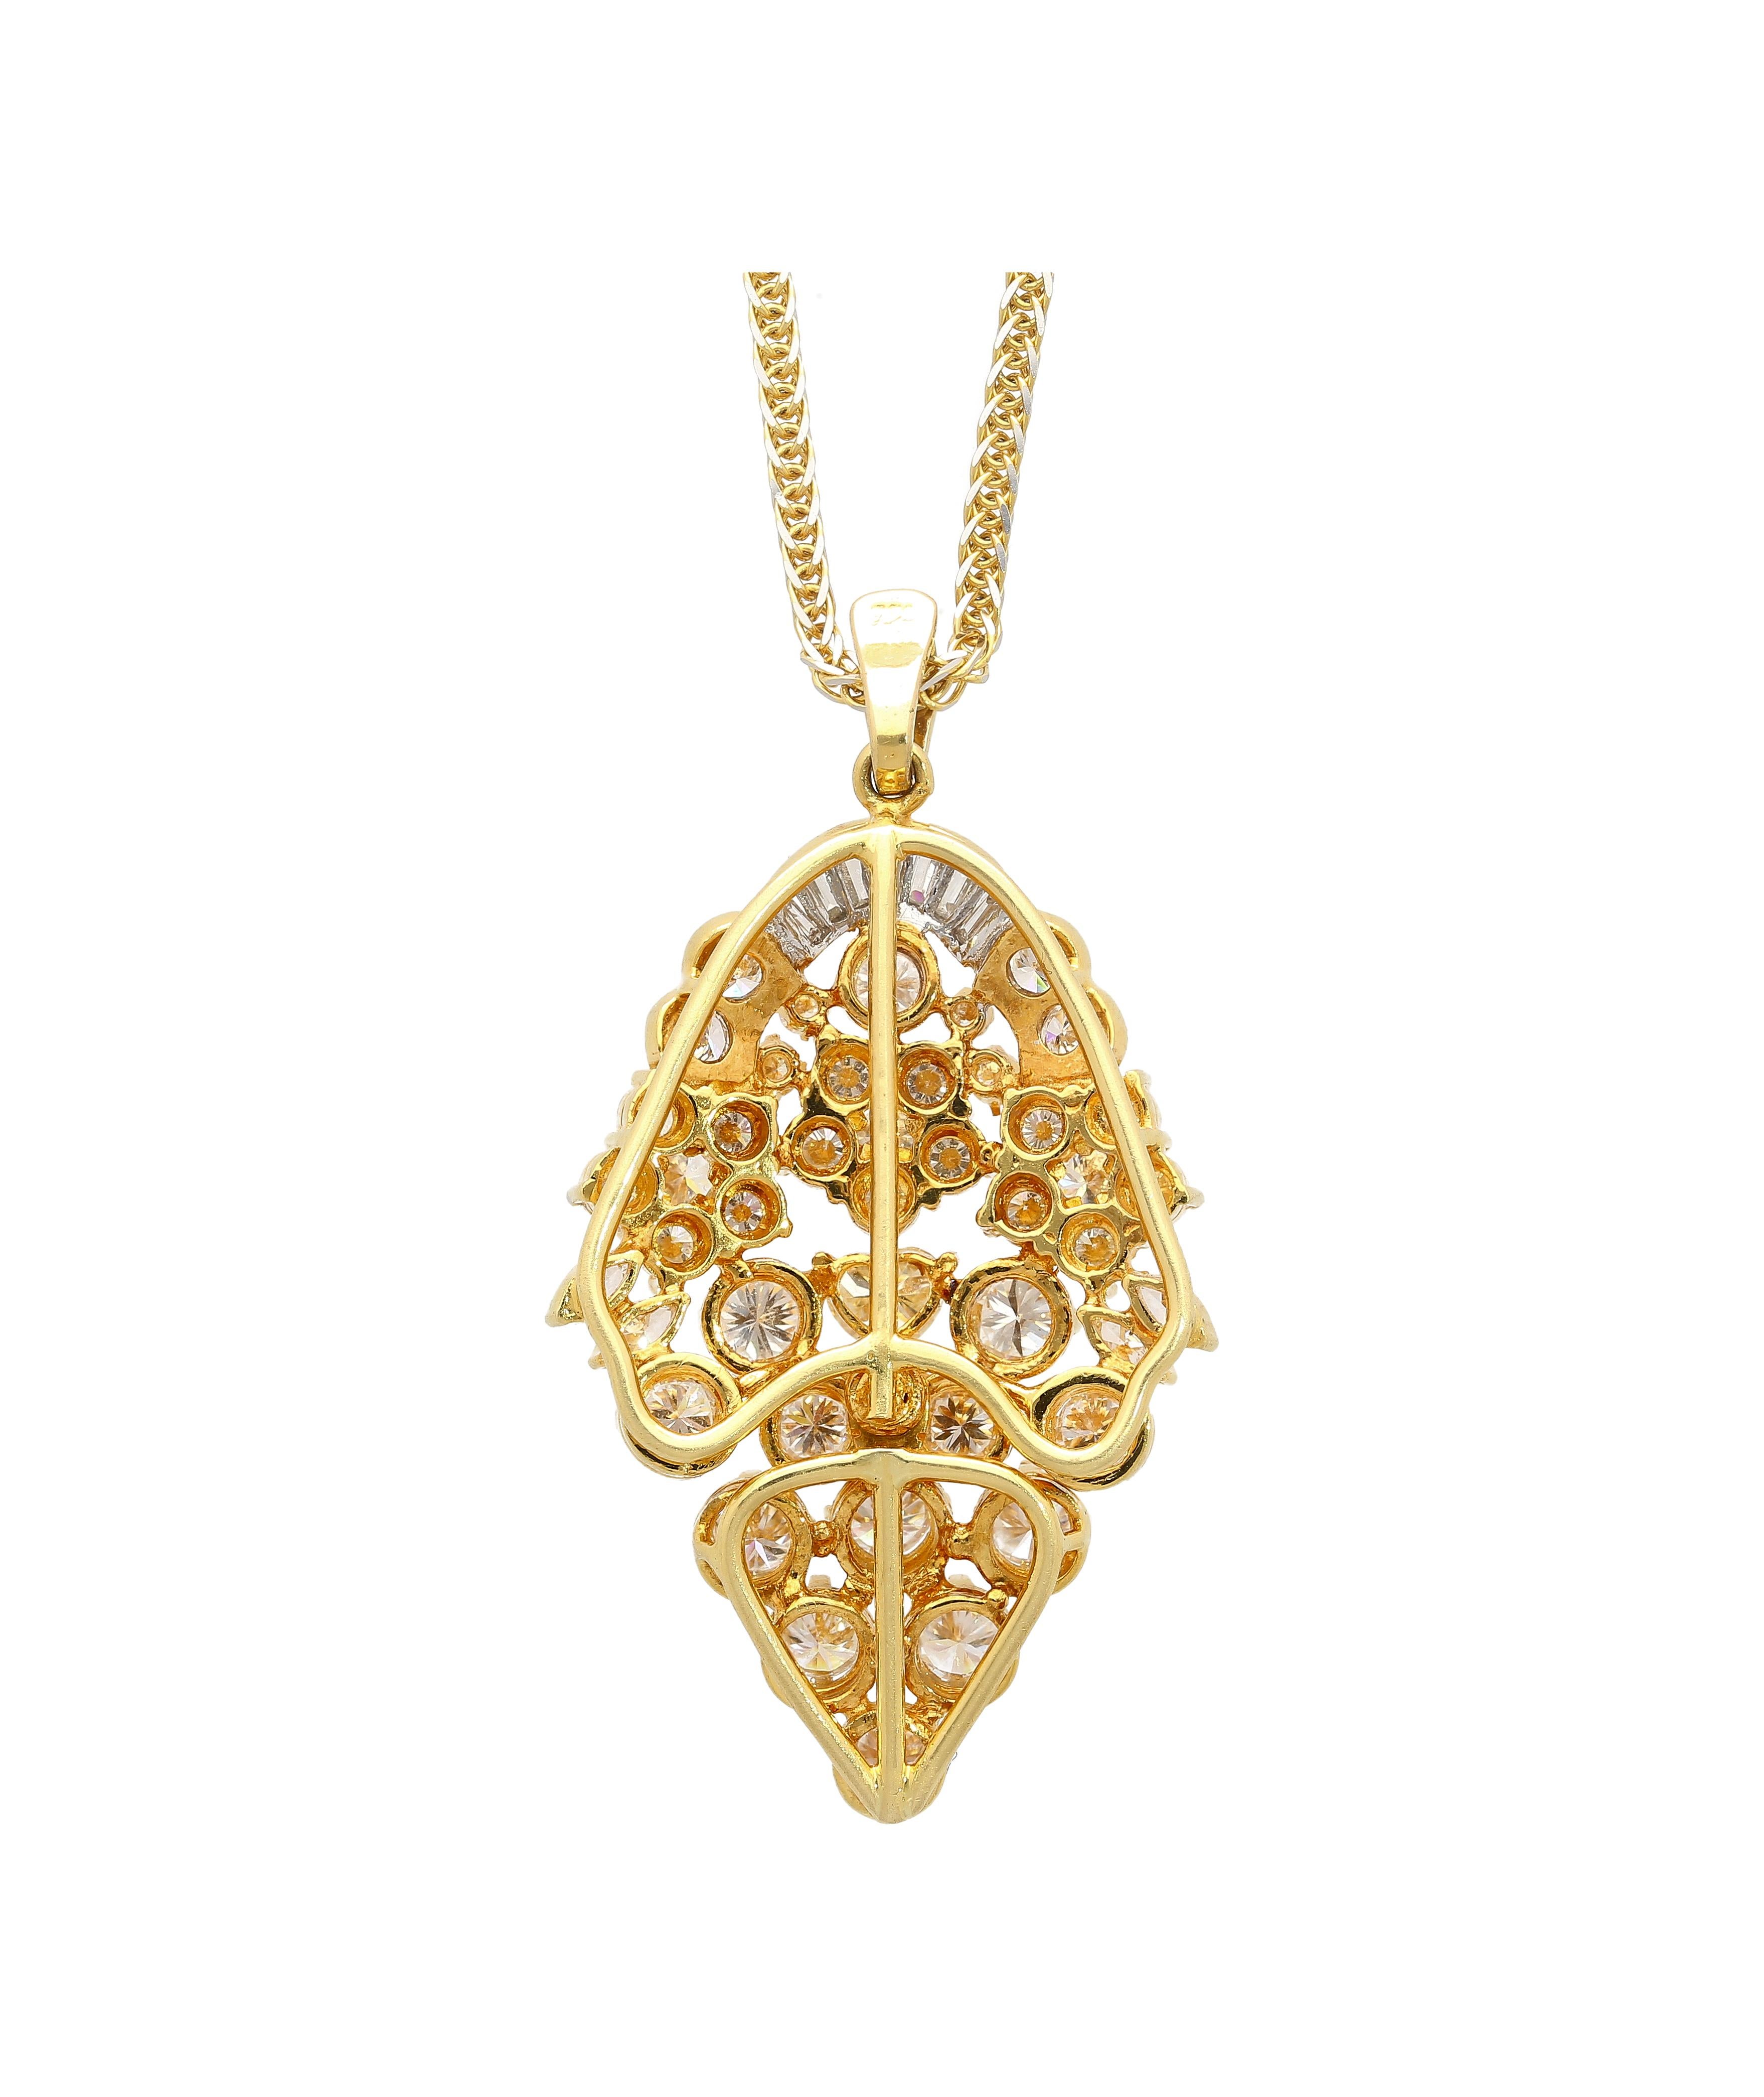 5 CTTW Diamond Cluster Multi Cut Pendant in 18K Yellow Gold Necklace For Sale 1